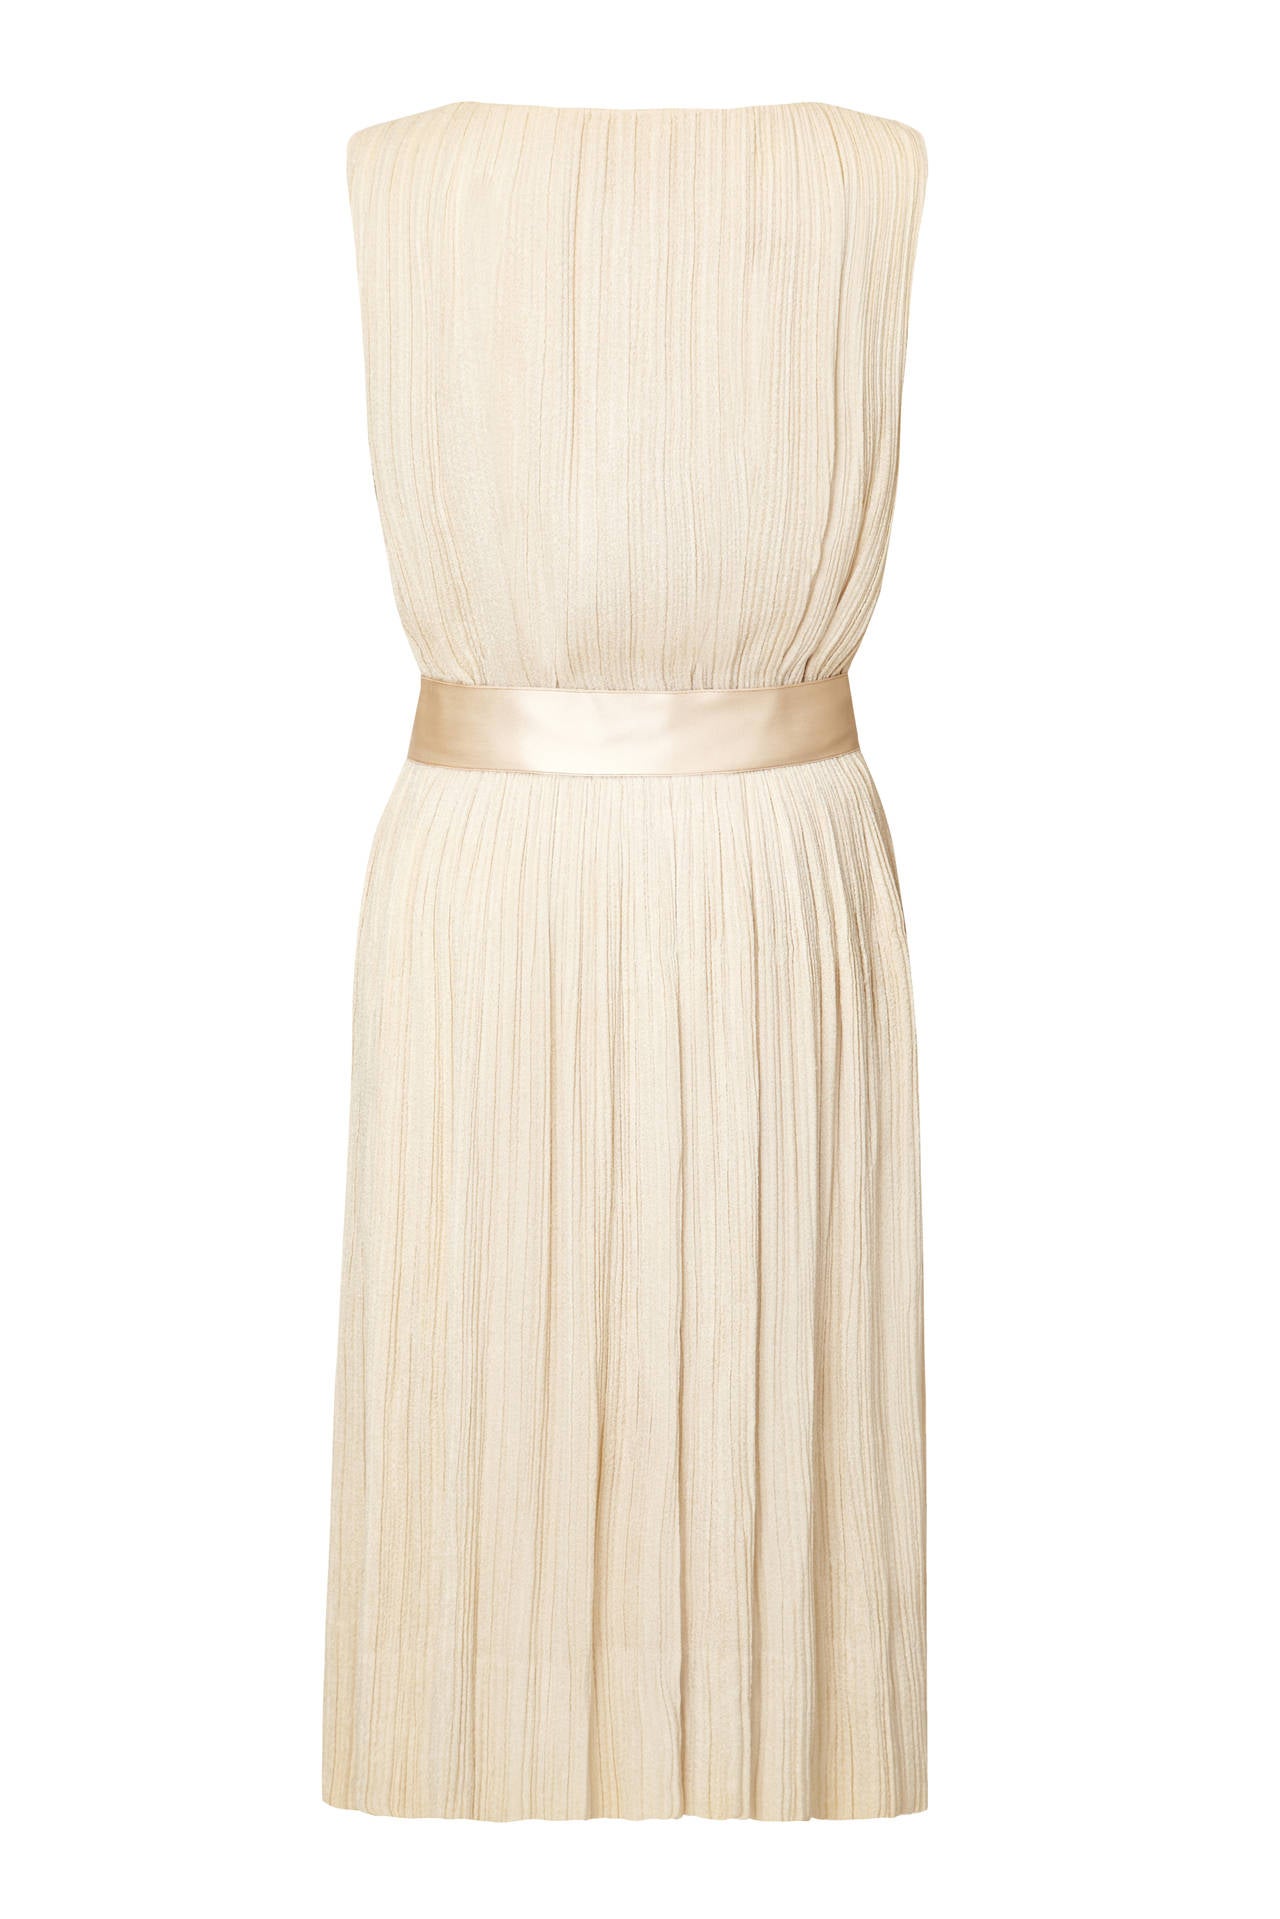 Gorgeous and very sophisticated original vintage 1960s dress by Ferdinando Sarmi of New York.  Of the softest and finely pleated cream silk with a cream satin bow belt and button stand.  It fastens down the front with poppers and is fully lined with